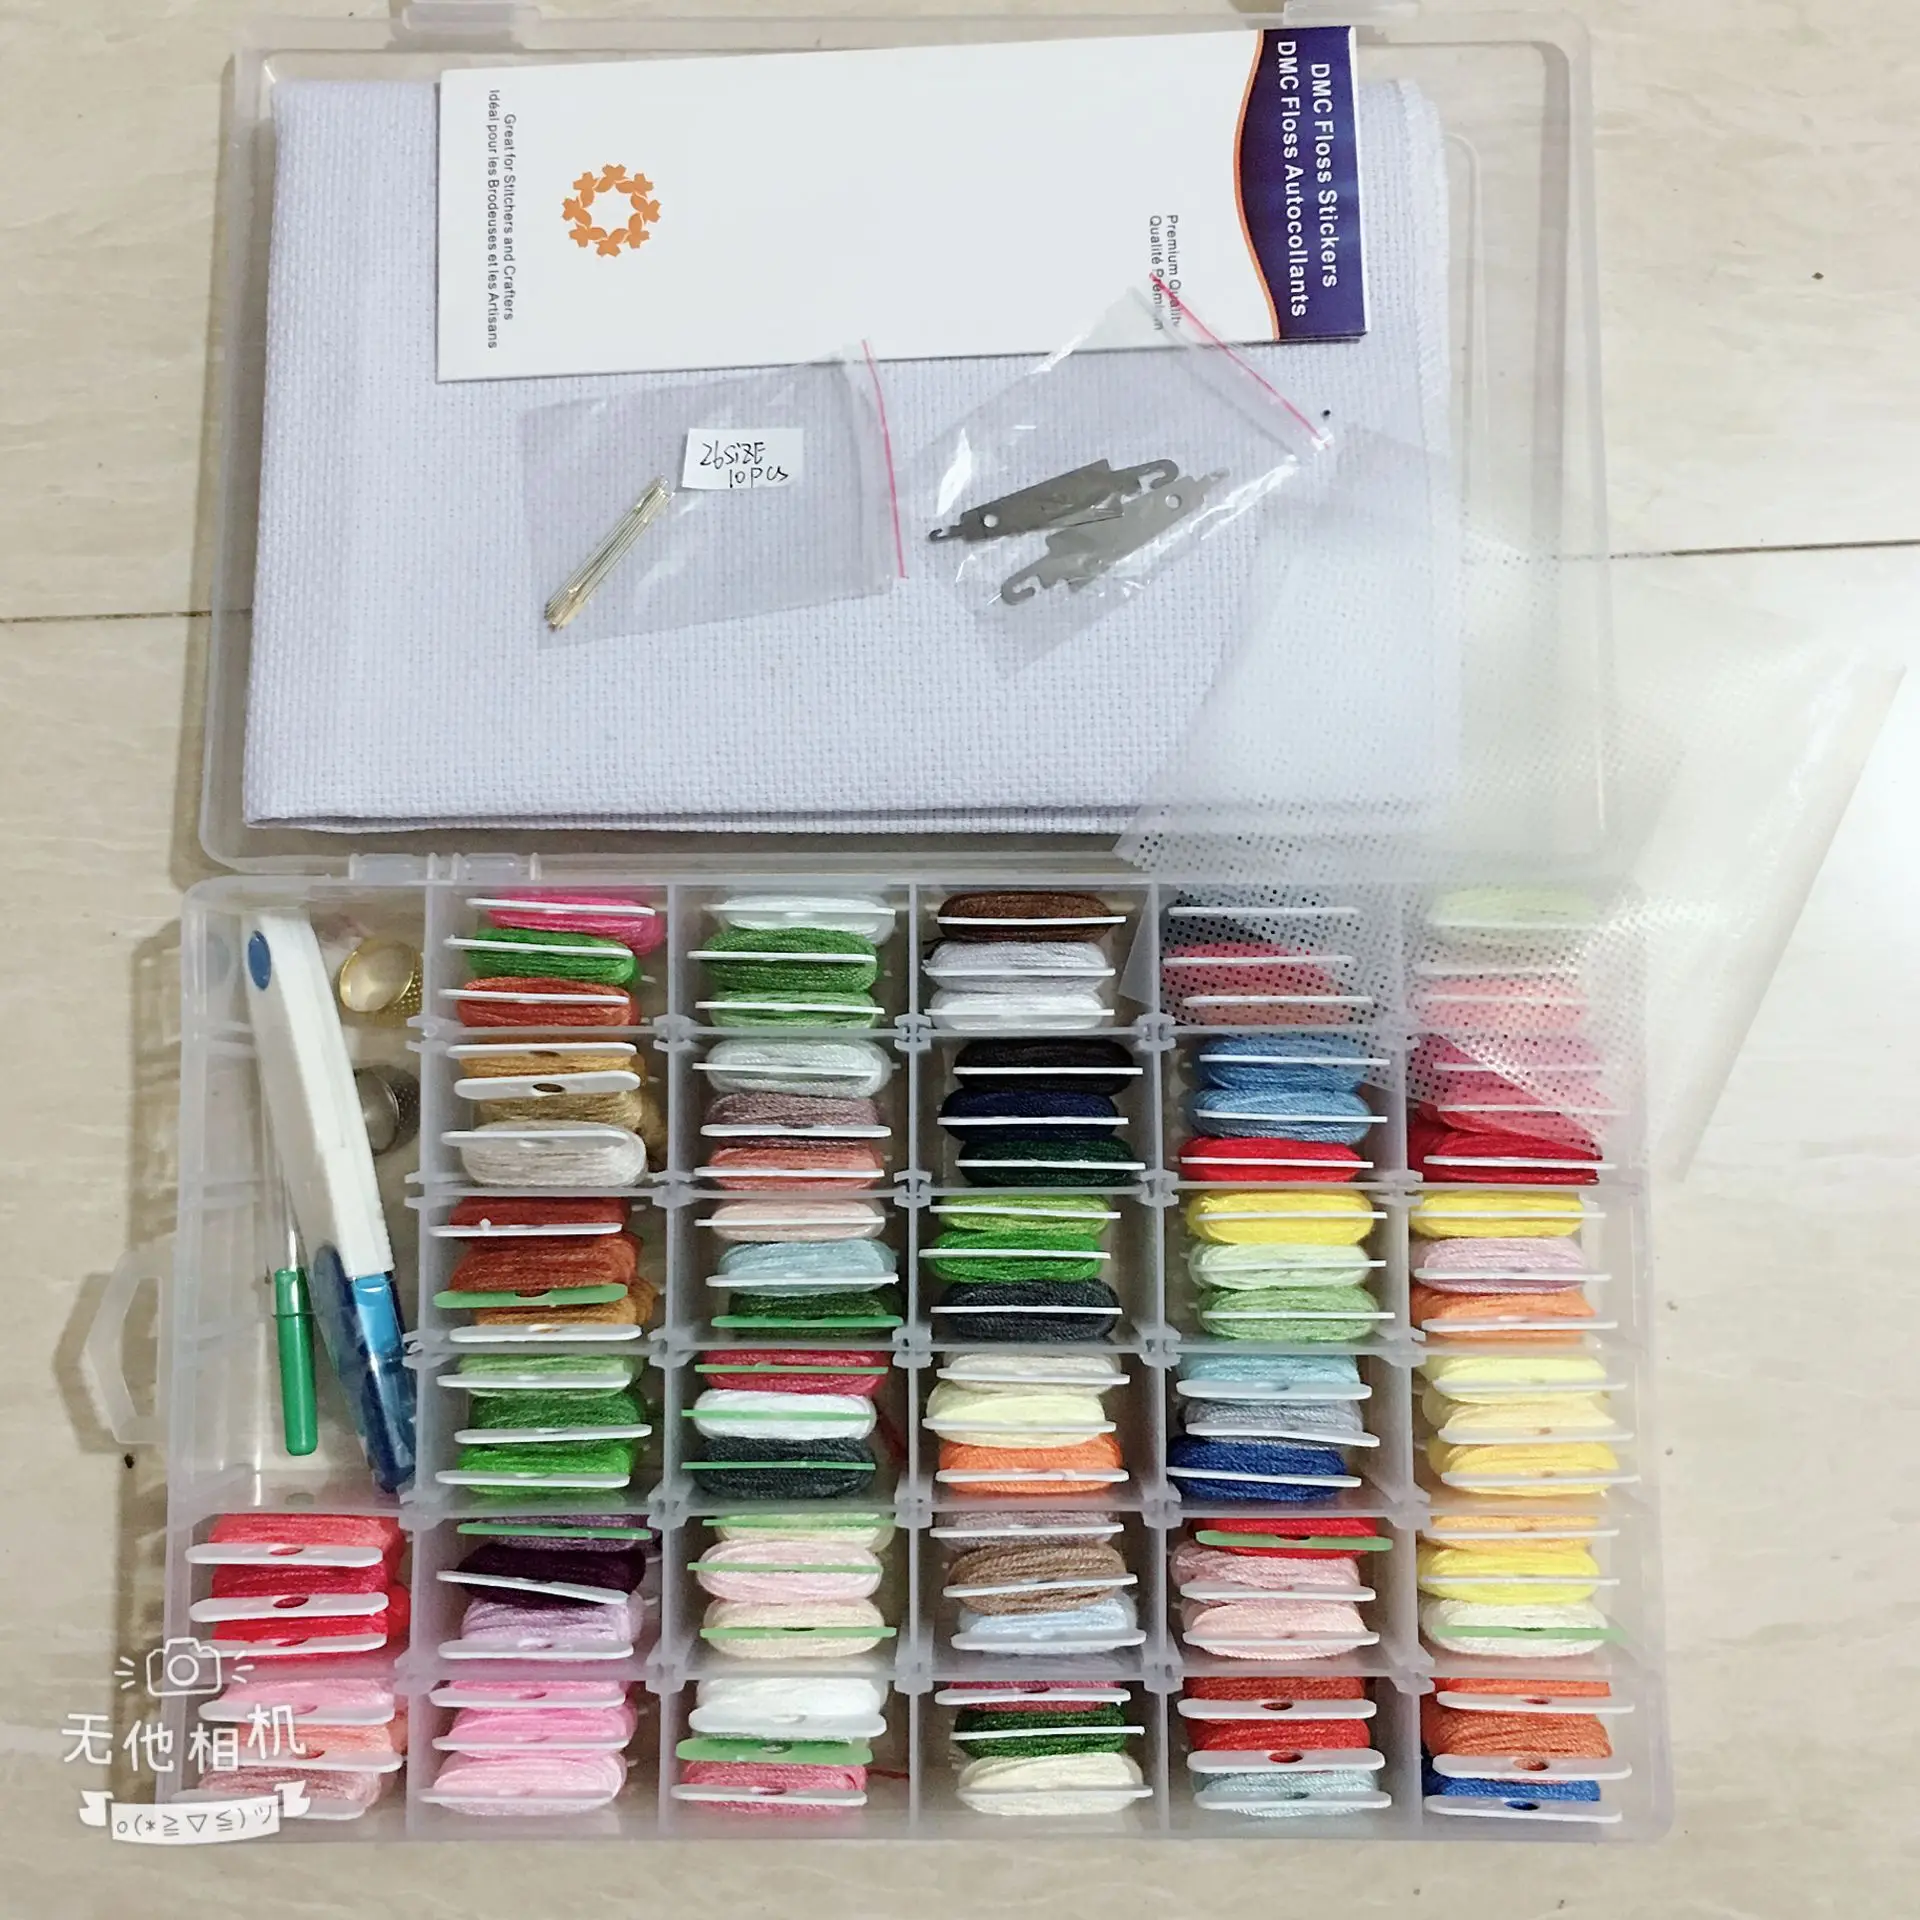 

96pcs Embroidery Floss Cross Stitch Thread Sekin Kit with Threader Bobbins Sewing Needles Storage Box Embroidery Starter